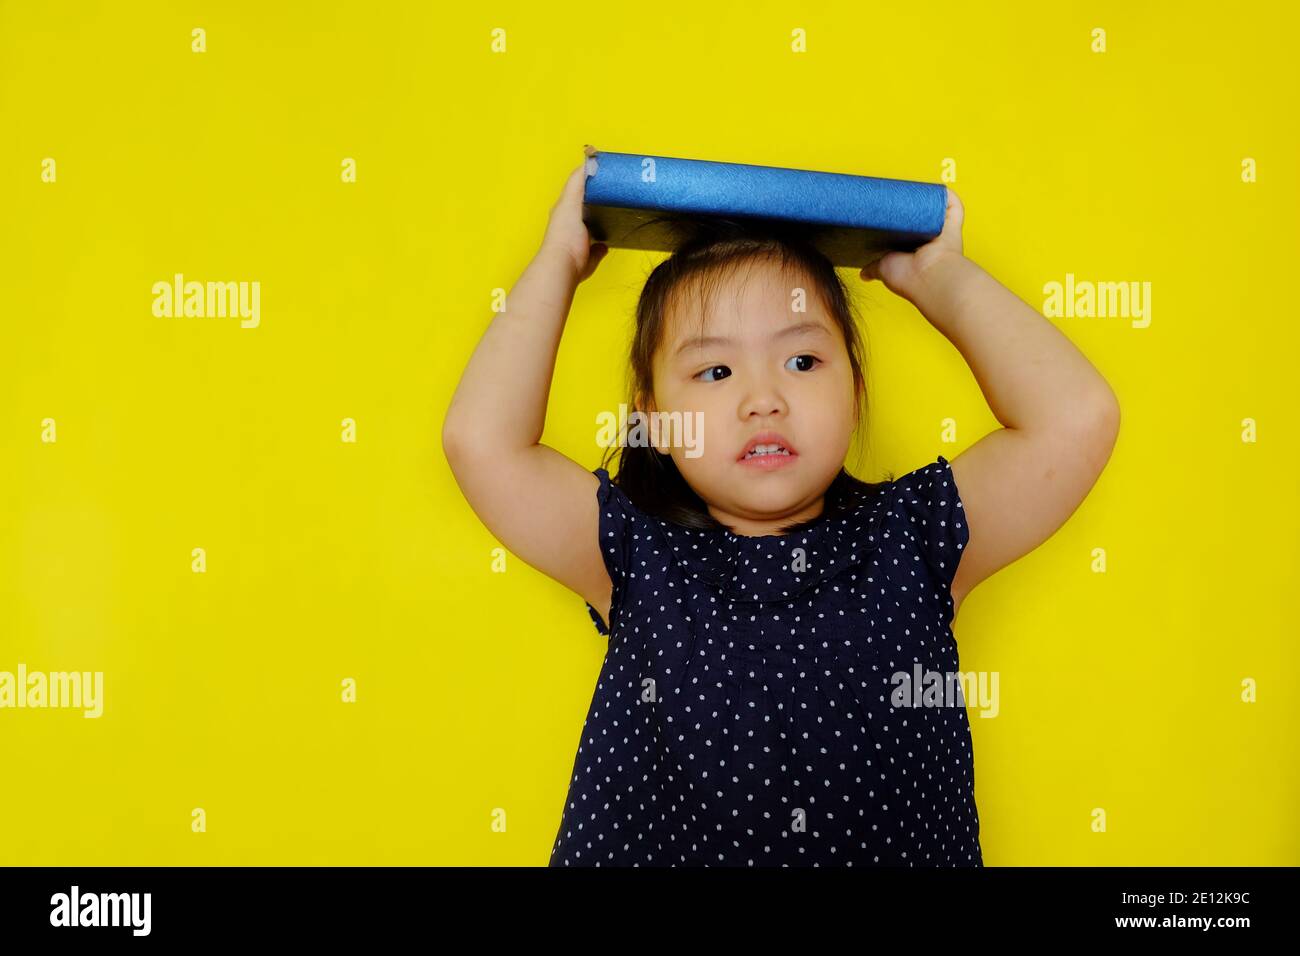 A cute young Asian girl trying to balance a large blue text book on her head as a punishment from her teacher. Bright yellow background. Stock Photo